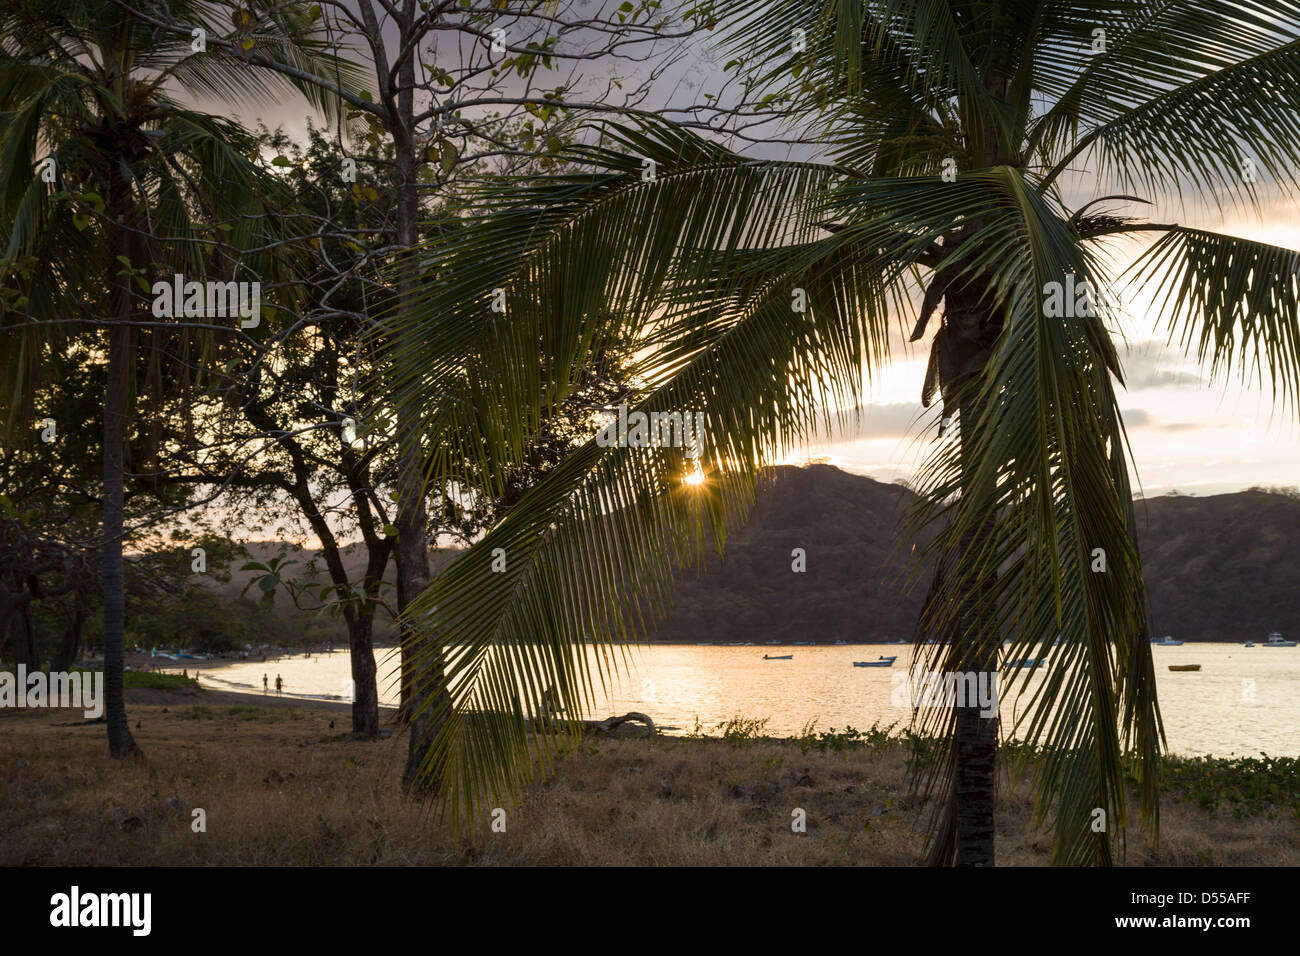 Palm trees and setting sun at Coco Beach, Playas del Coco, Guanacaste Province, Costa Rica. Stock Photo